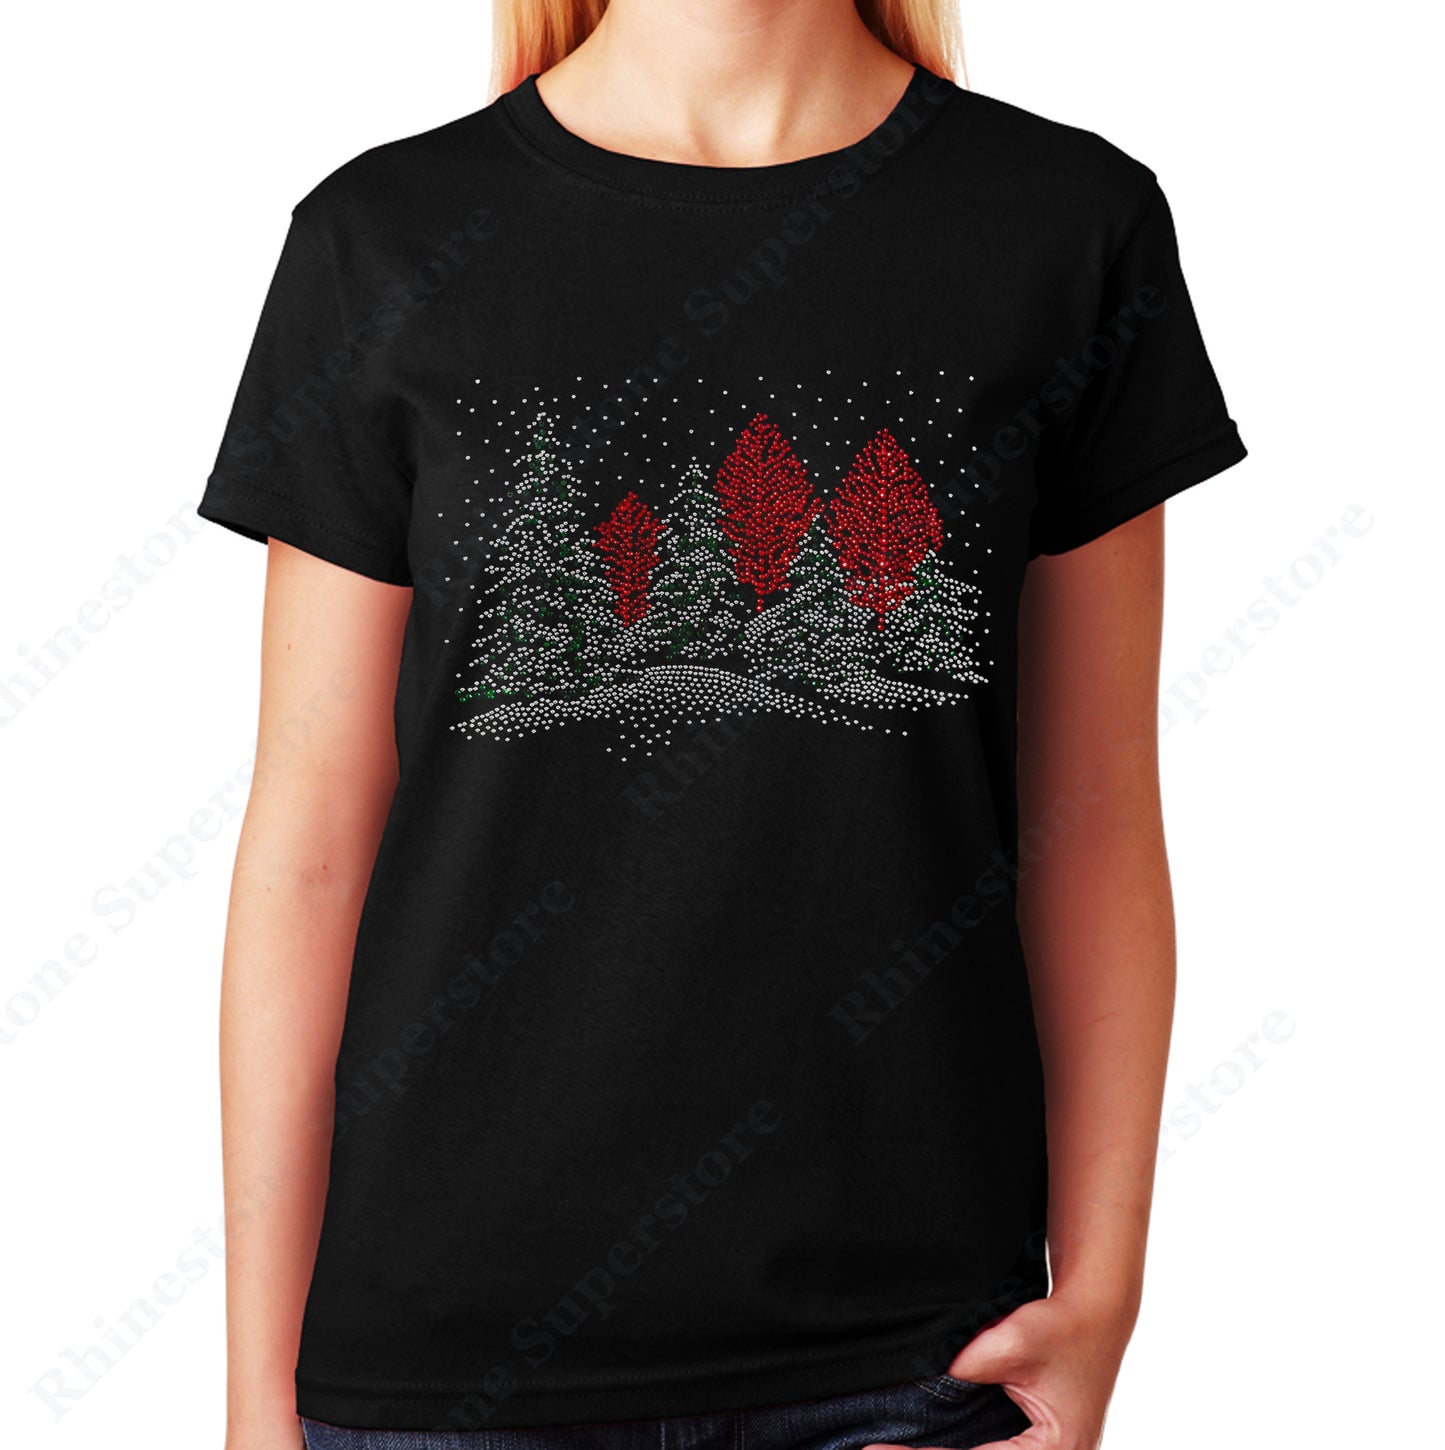 Women's / Unisex T-Shirt with Winter Scene with Snow and Trees in Rhinestones